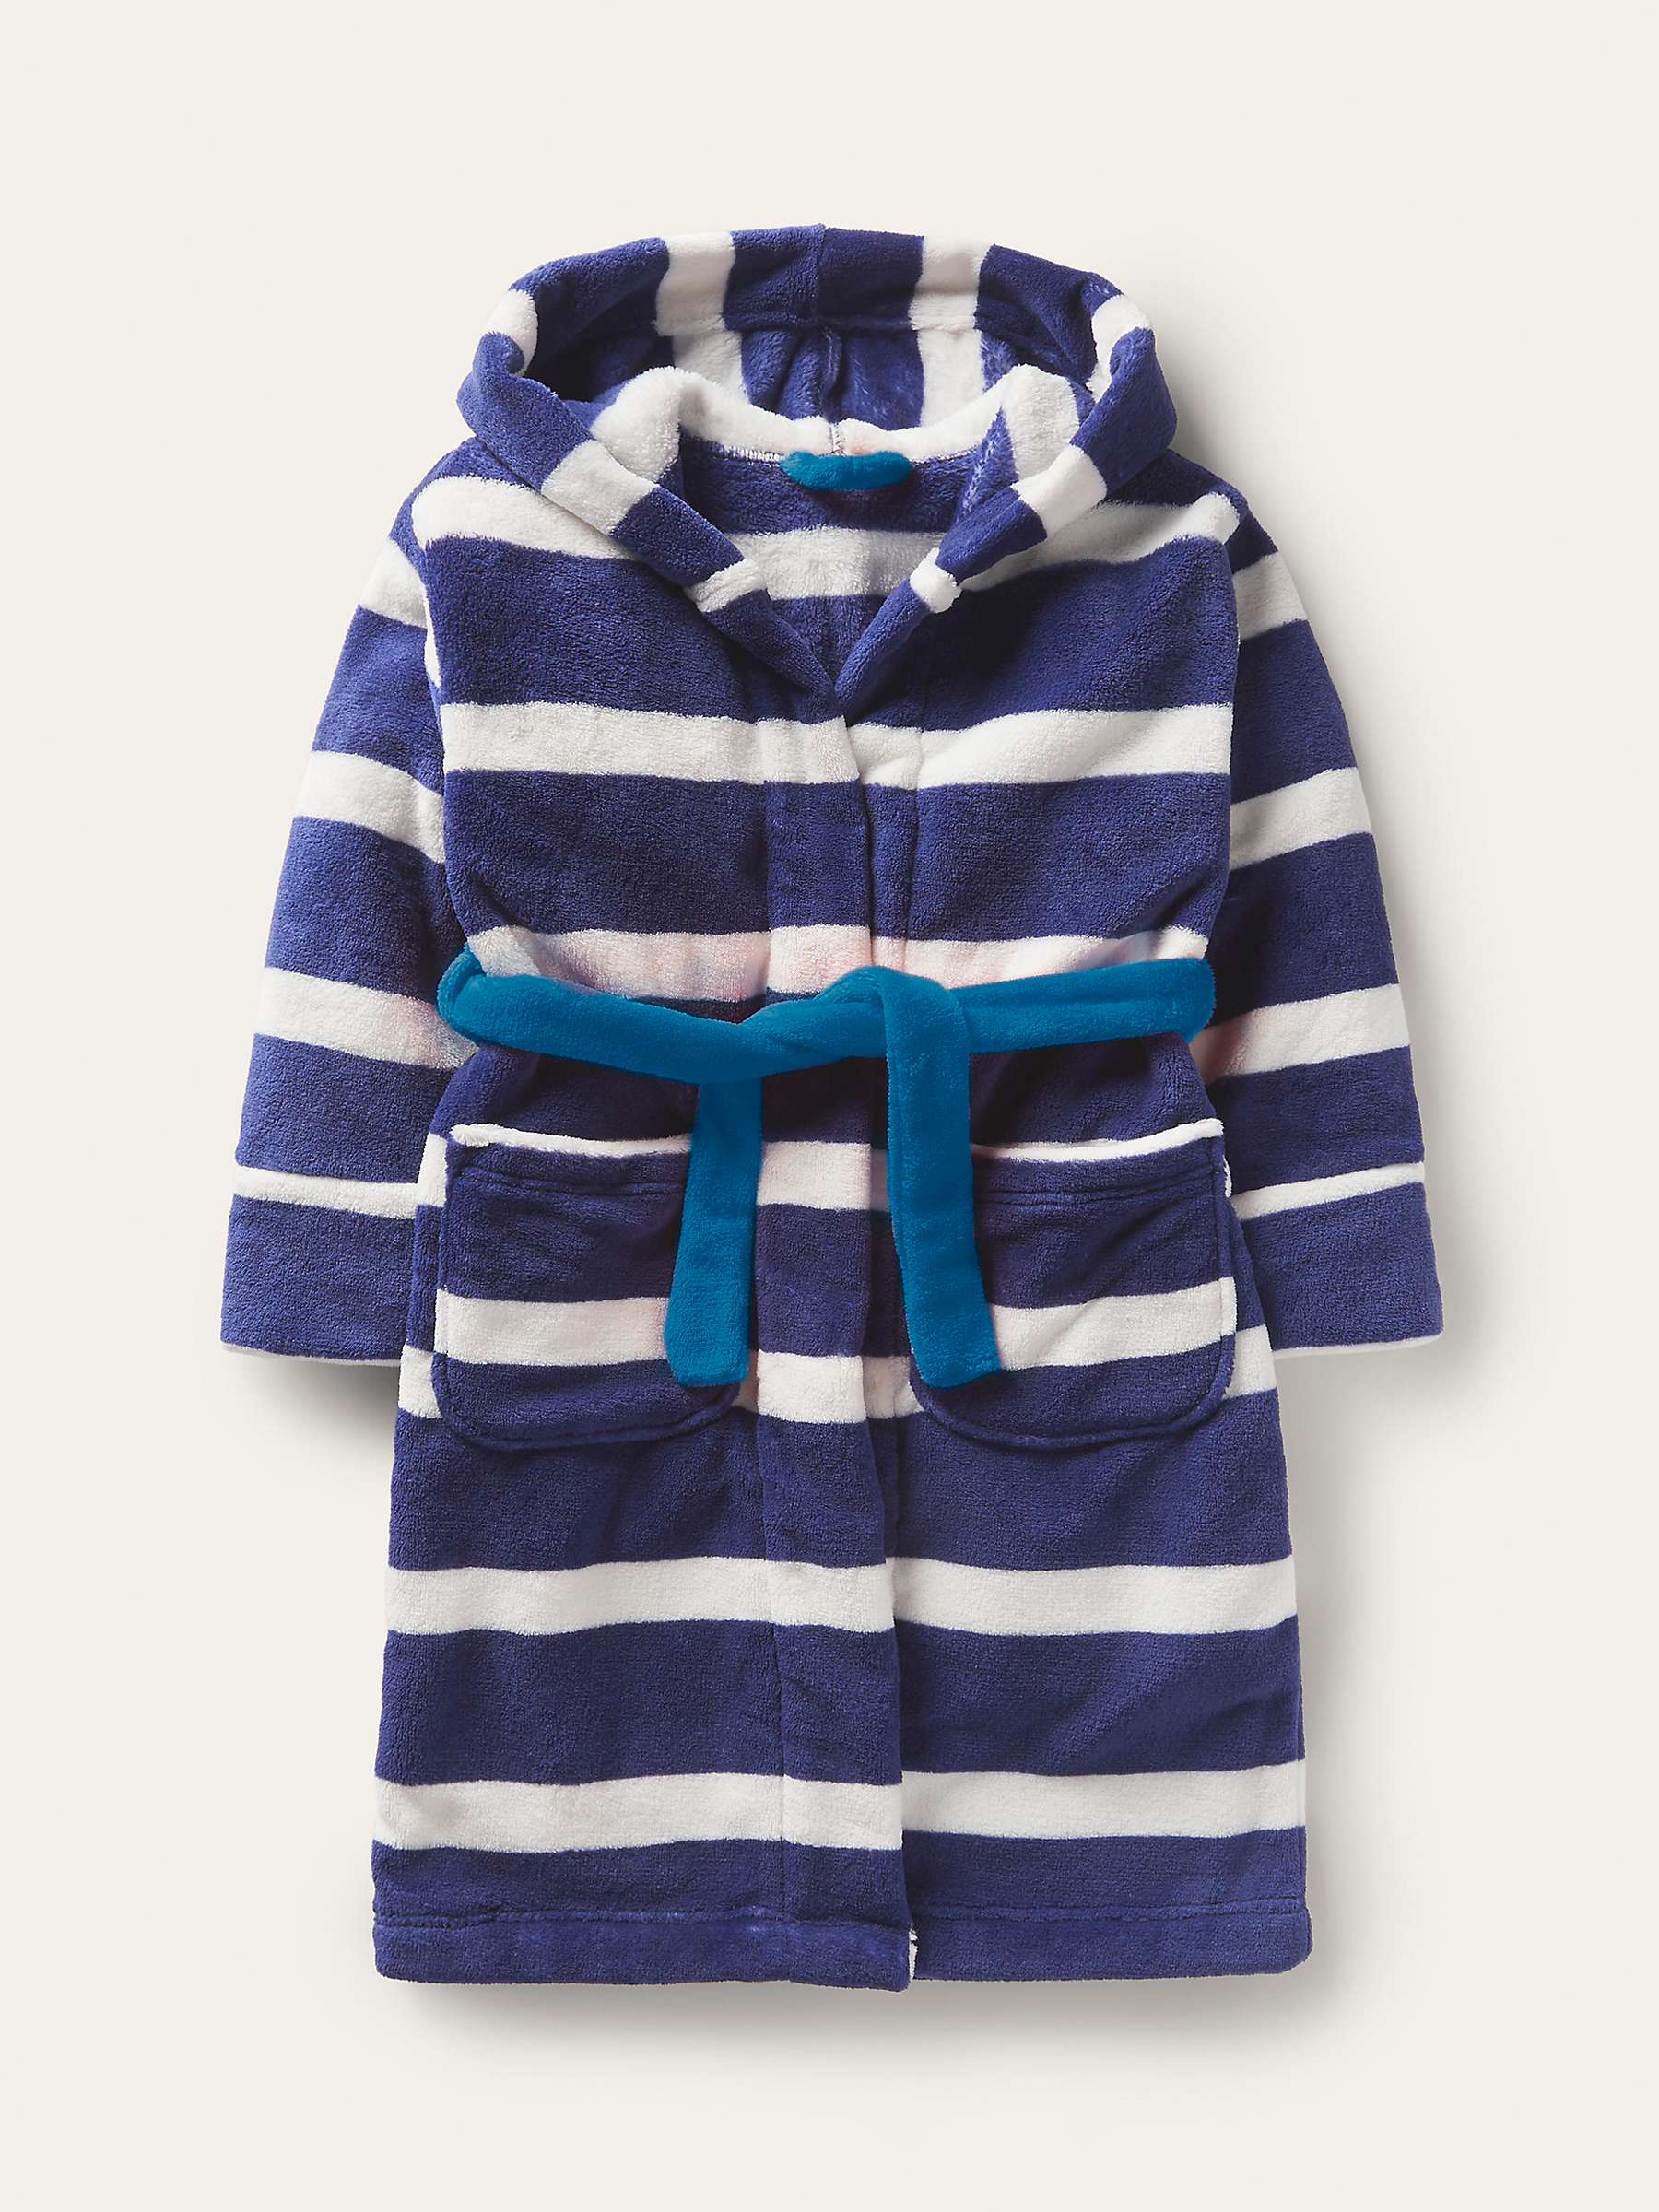 Buy Mini Boden Kids' Cosy Dressing Gown, Starboard/Ivory Online at johnlewis.com